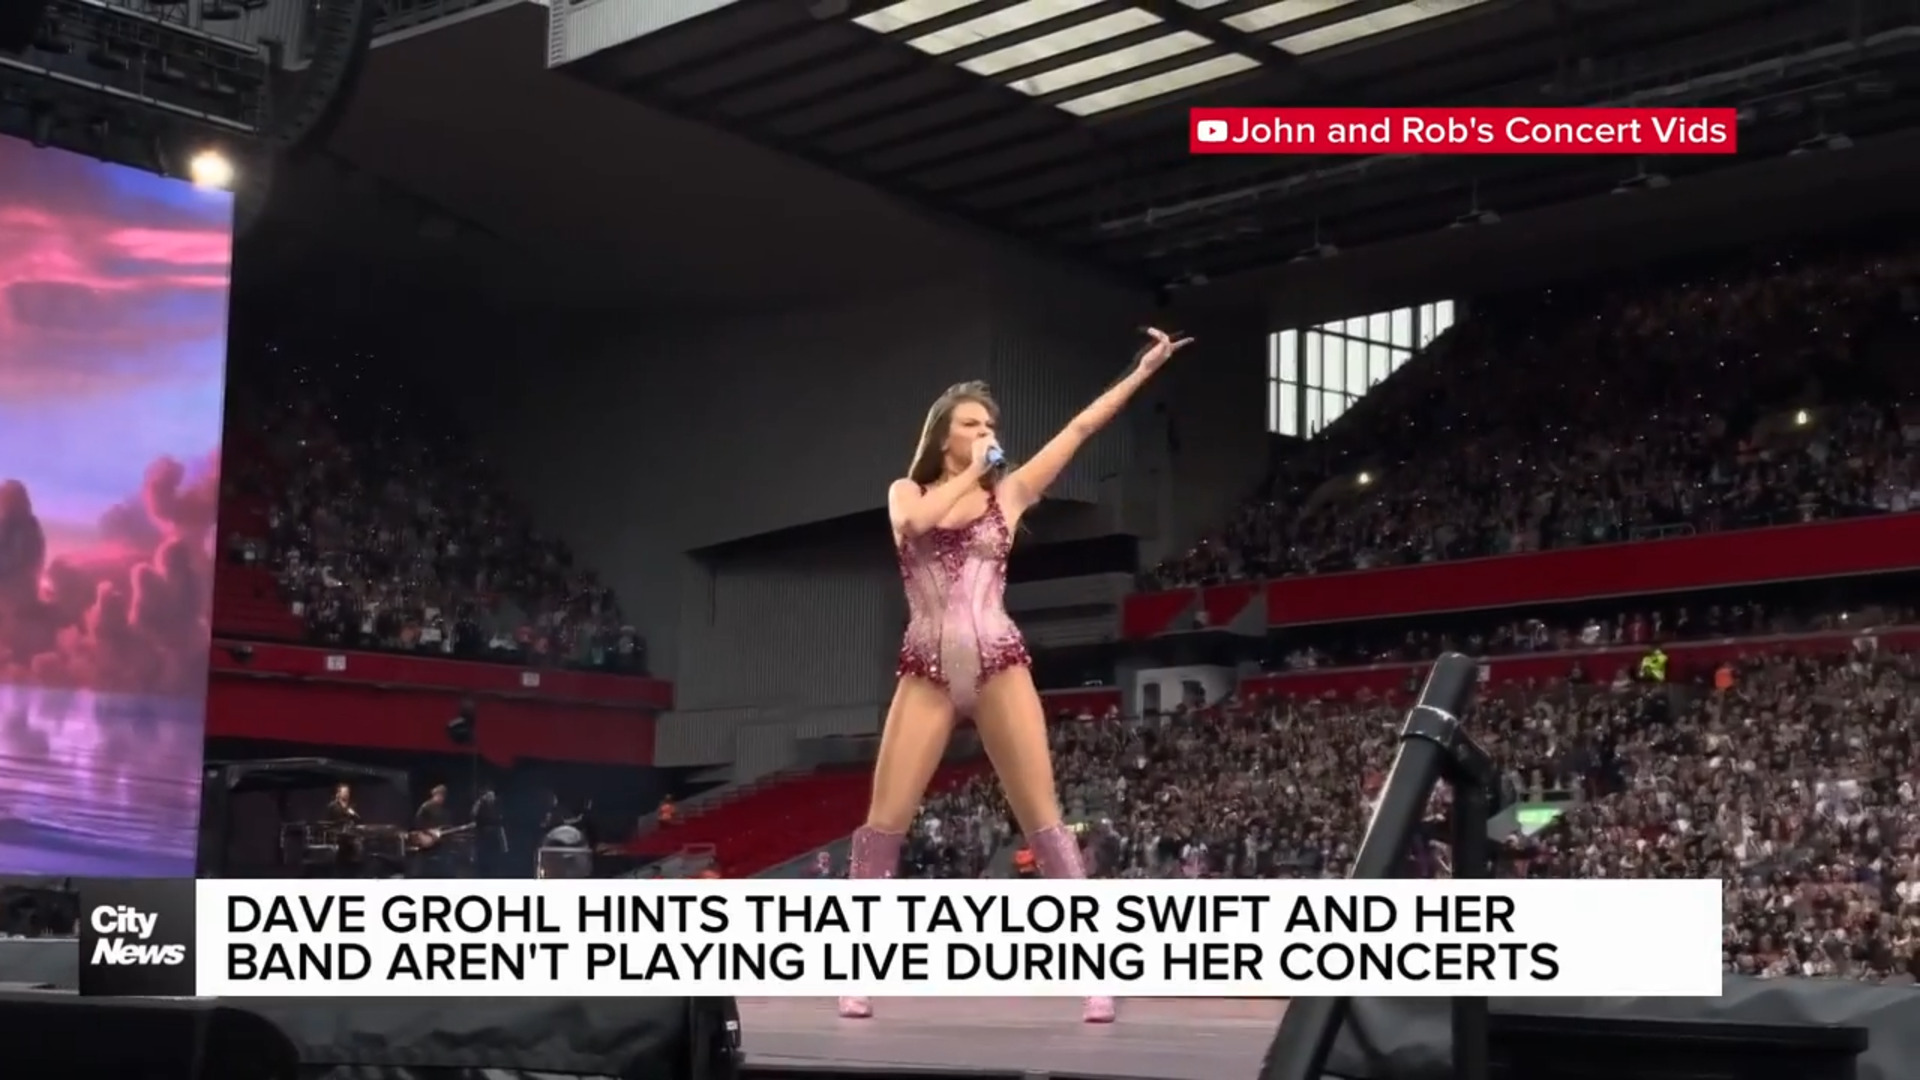 Dave Grohl questions Taylor Swift's live shows